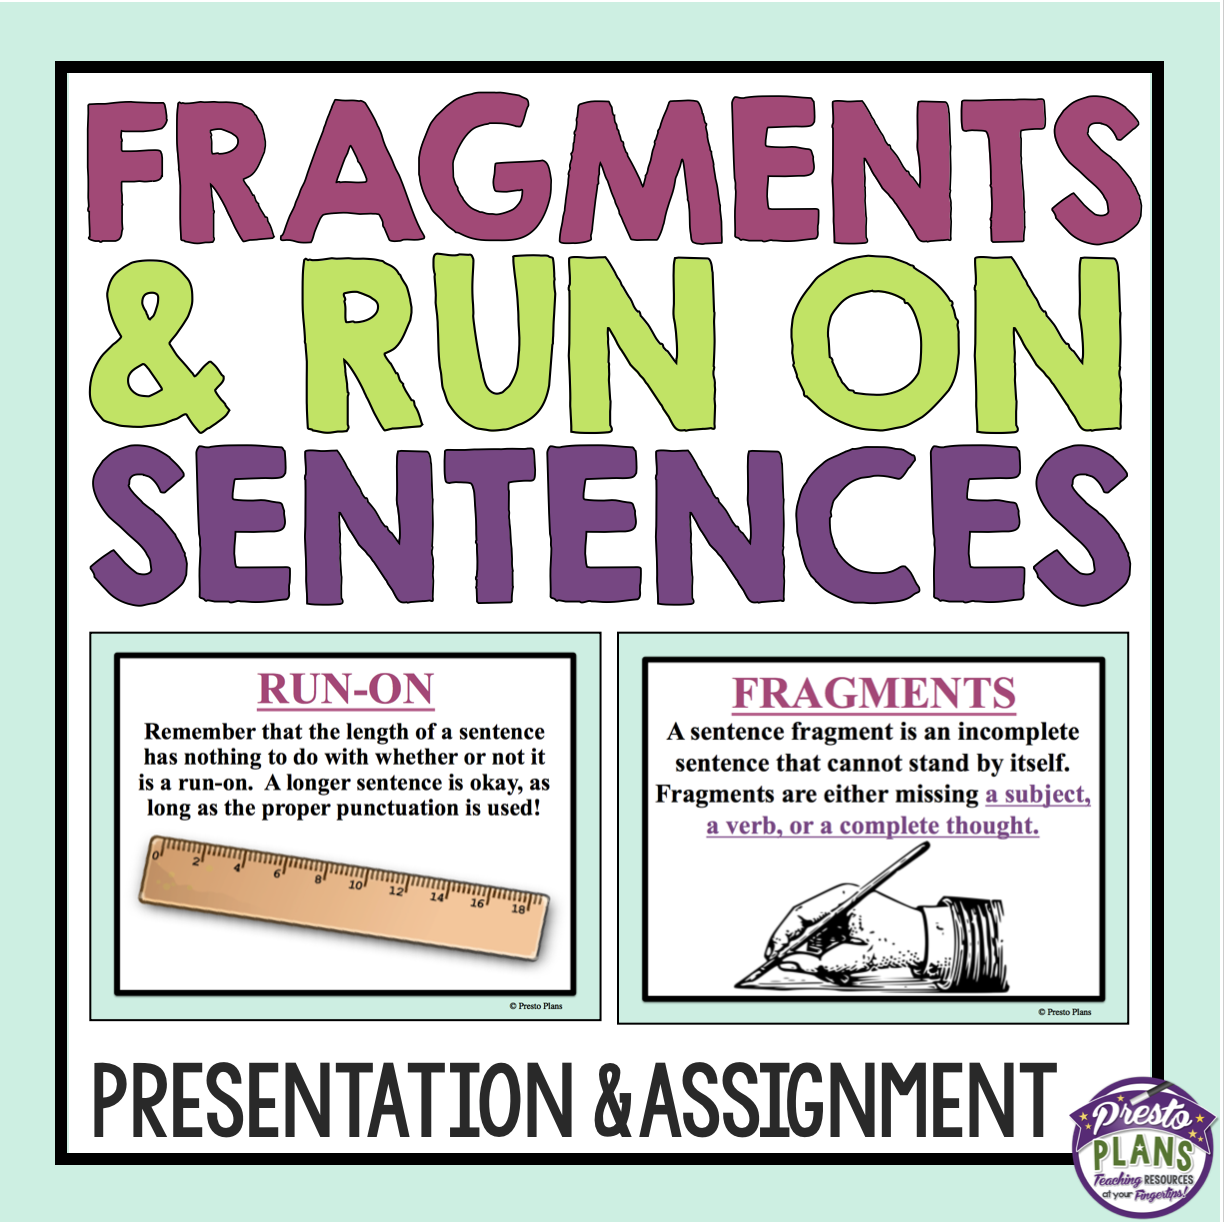 fragments-and-run-on-sentences-prestoplanners